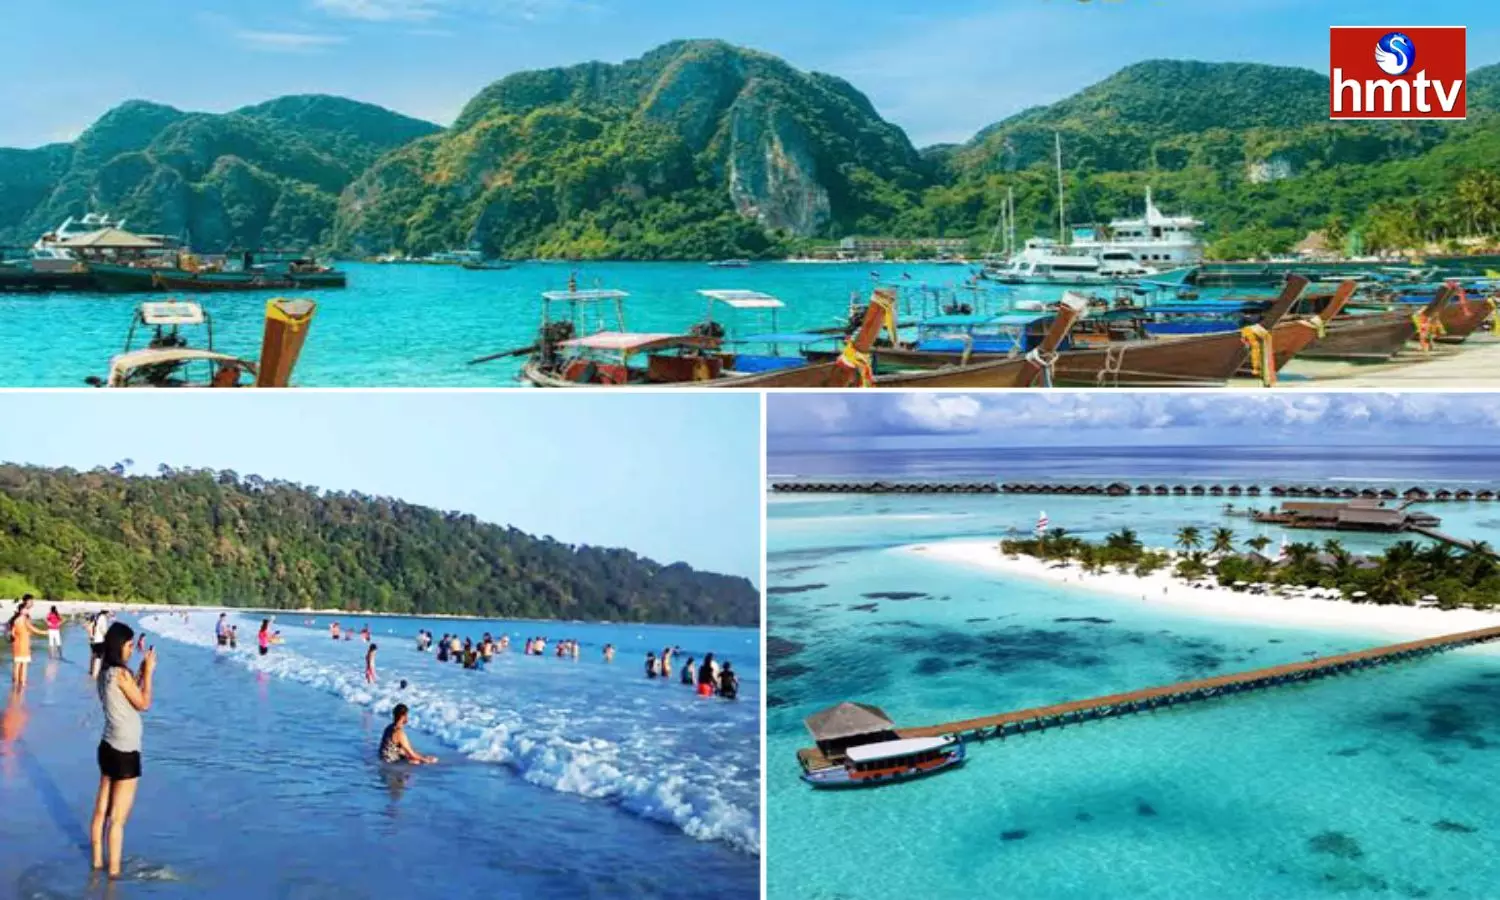 Andaman and Nicobar Tour Package From RS 39600 From IRCTC Check Full Details Here